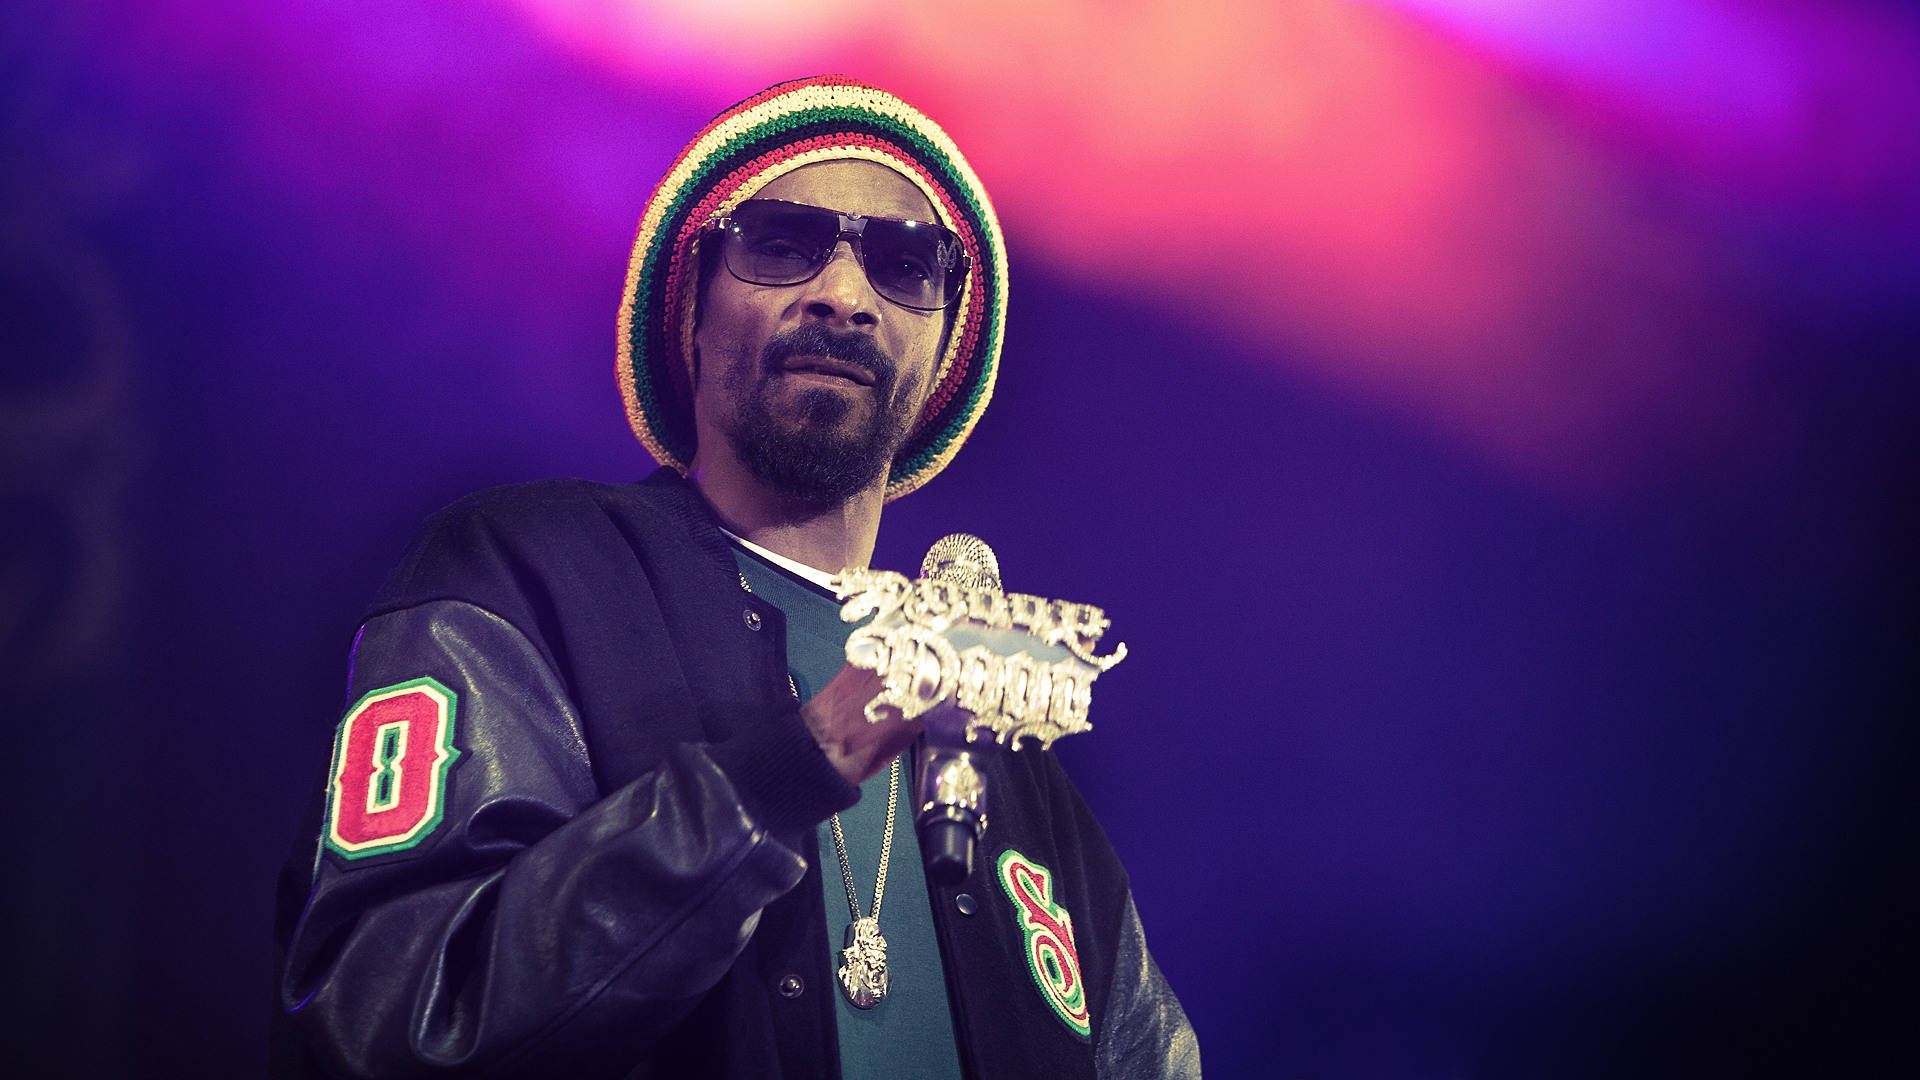 Snoop Dogg With Bejeweled Mic Wallpaper